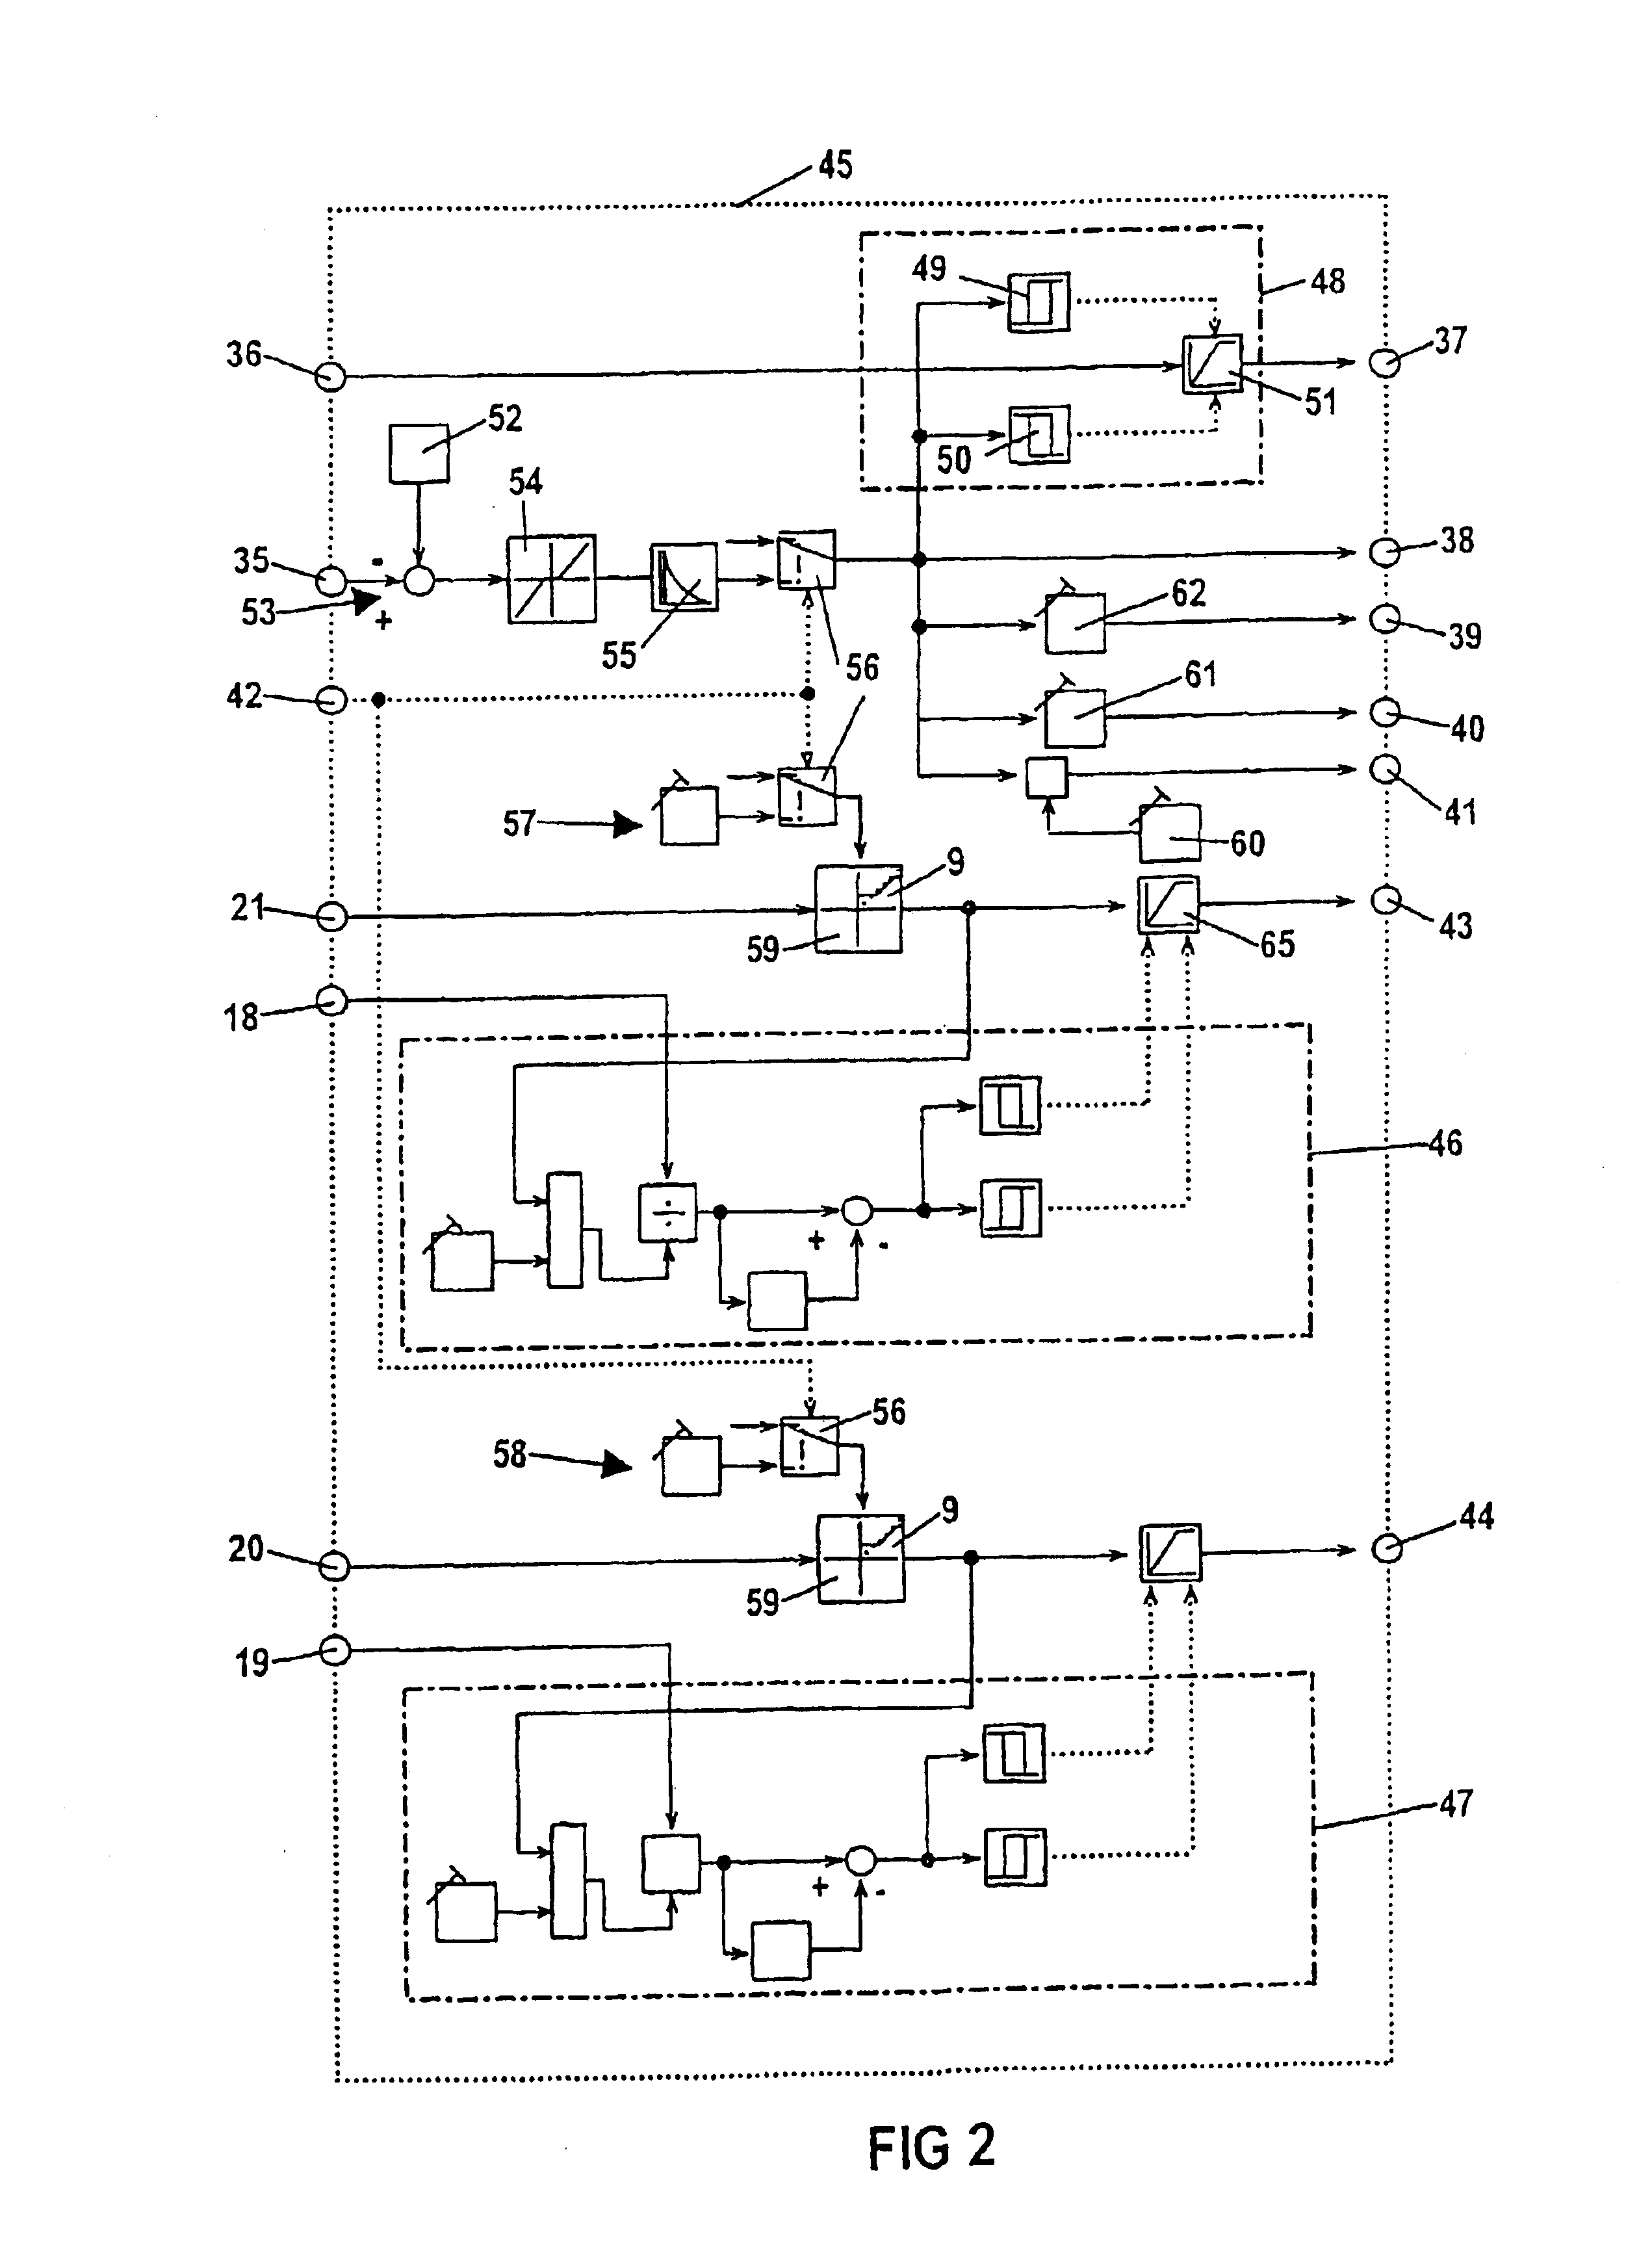 Method for the primary control in a combined gas/steam turbine installation